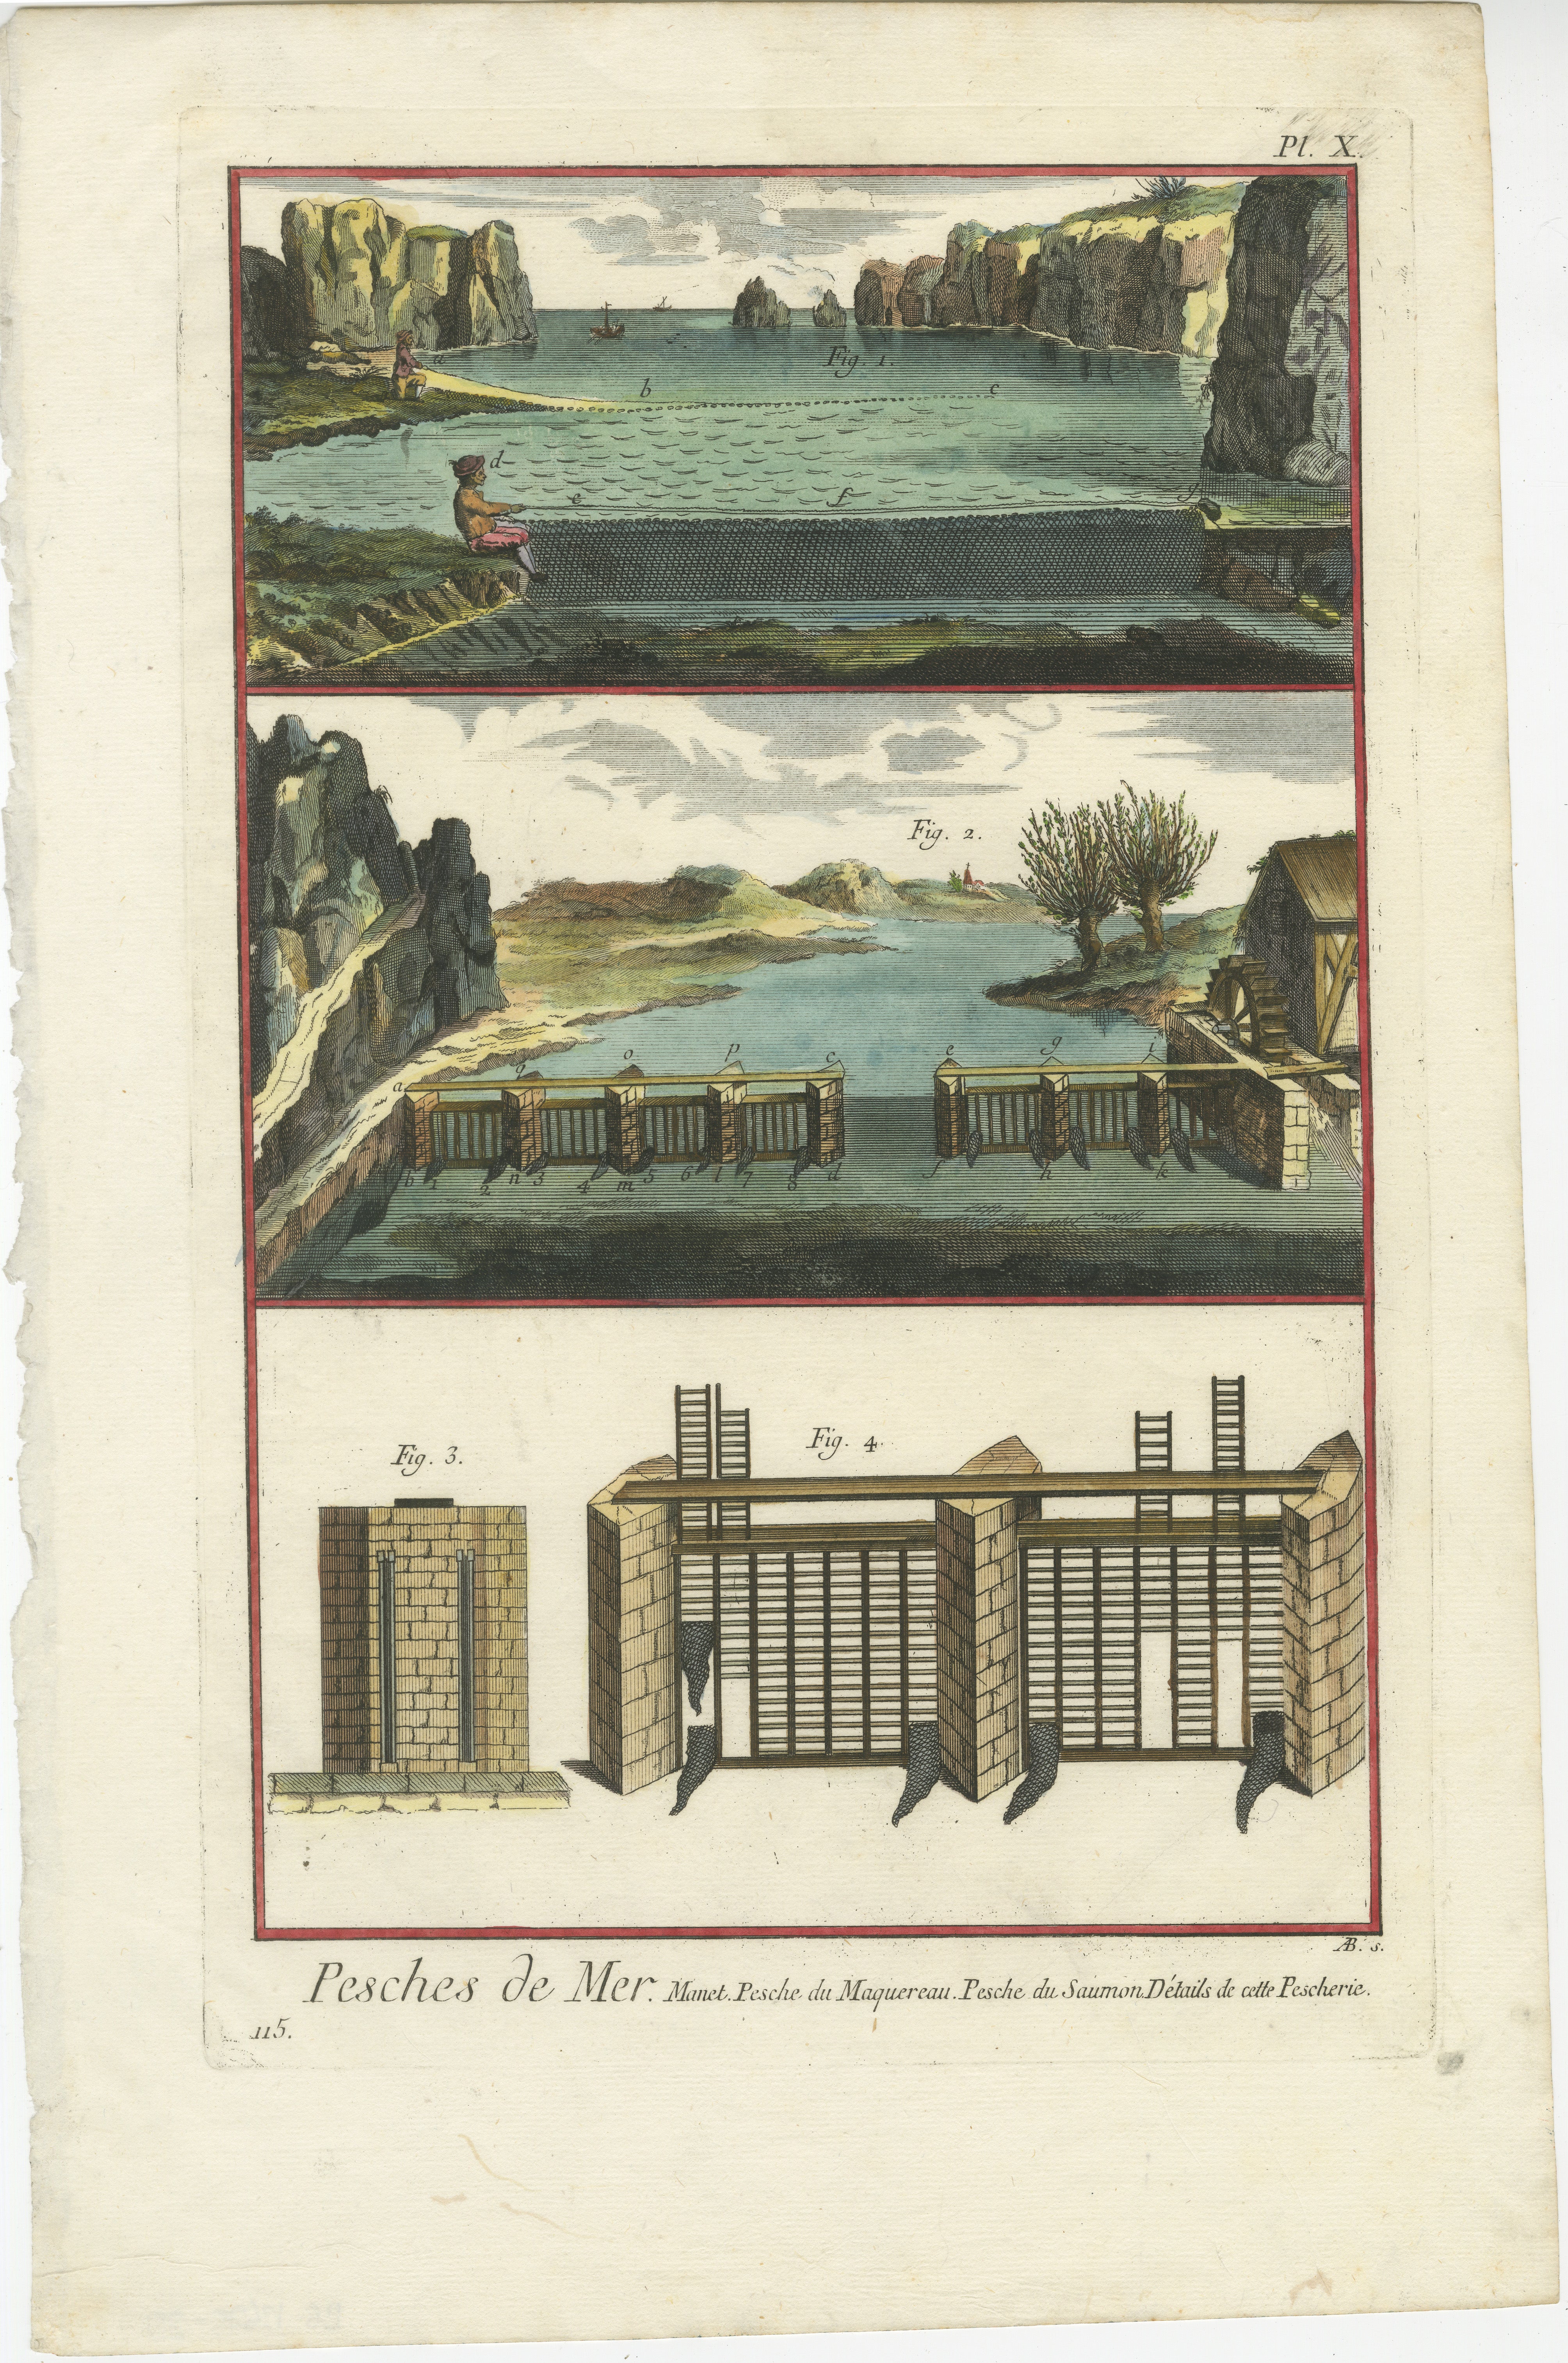 This antique engraving is an illustration from the monumental work of the 